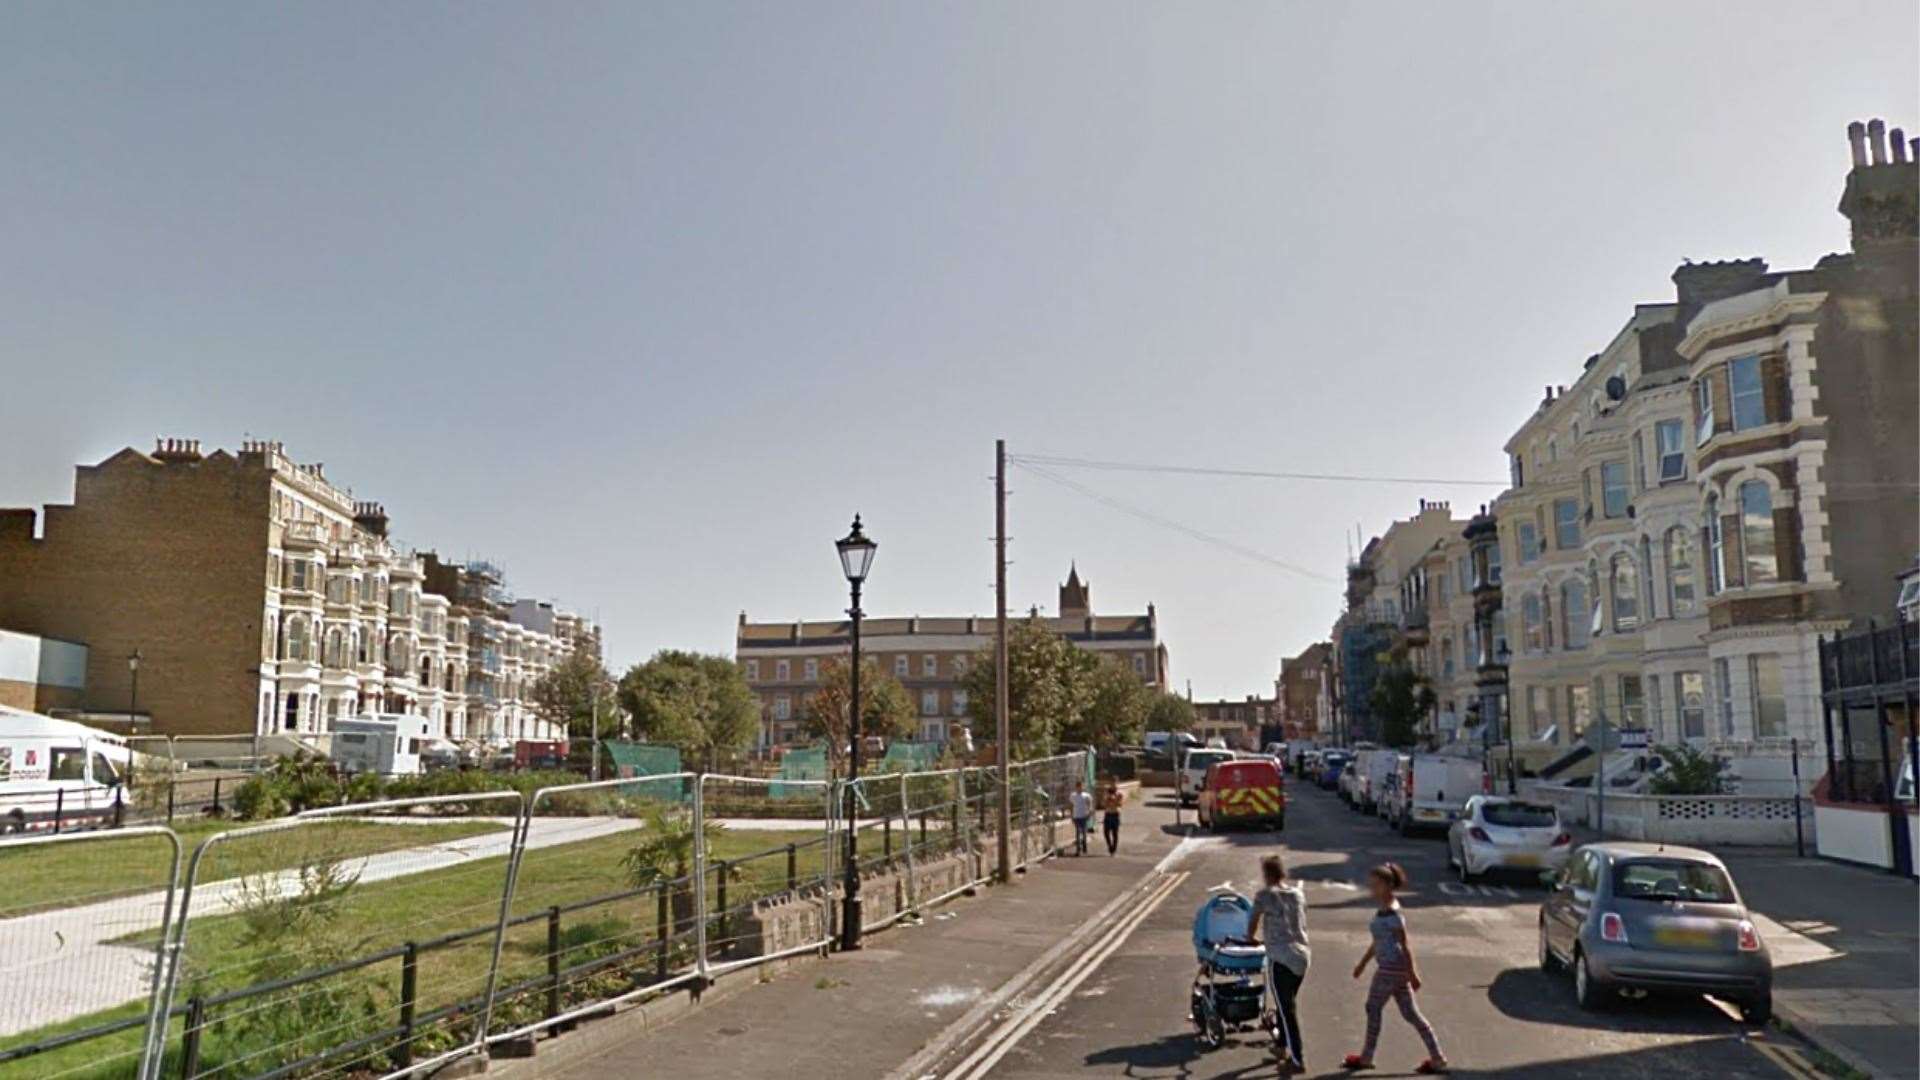 Dalby Square in Margate. Picture: Google Maps